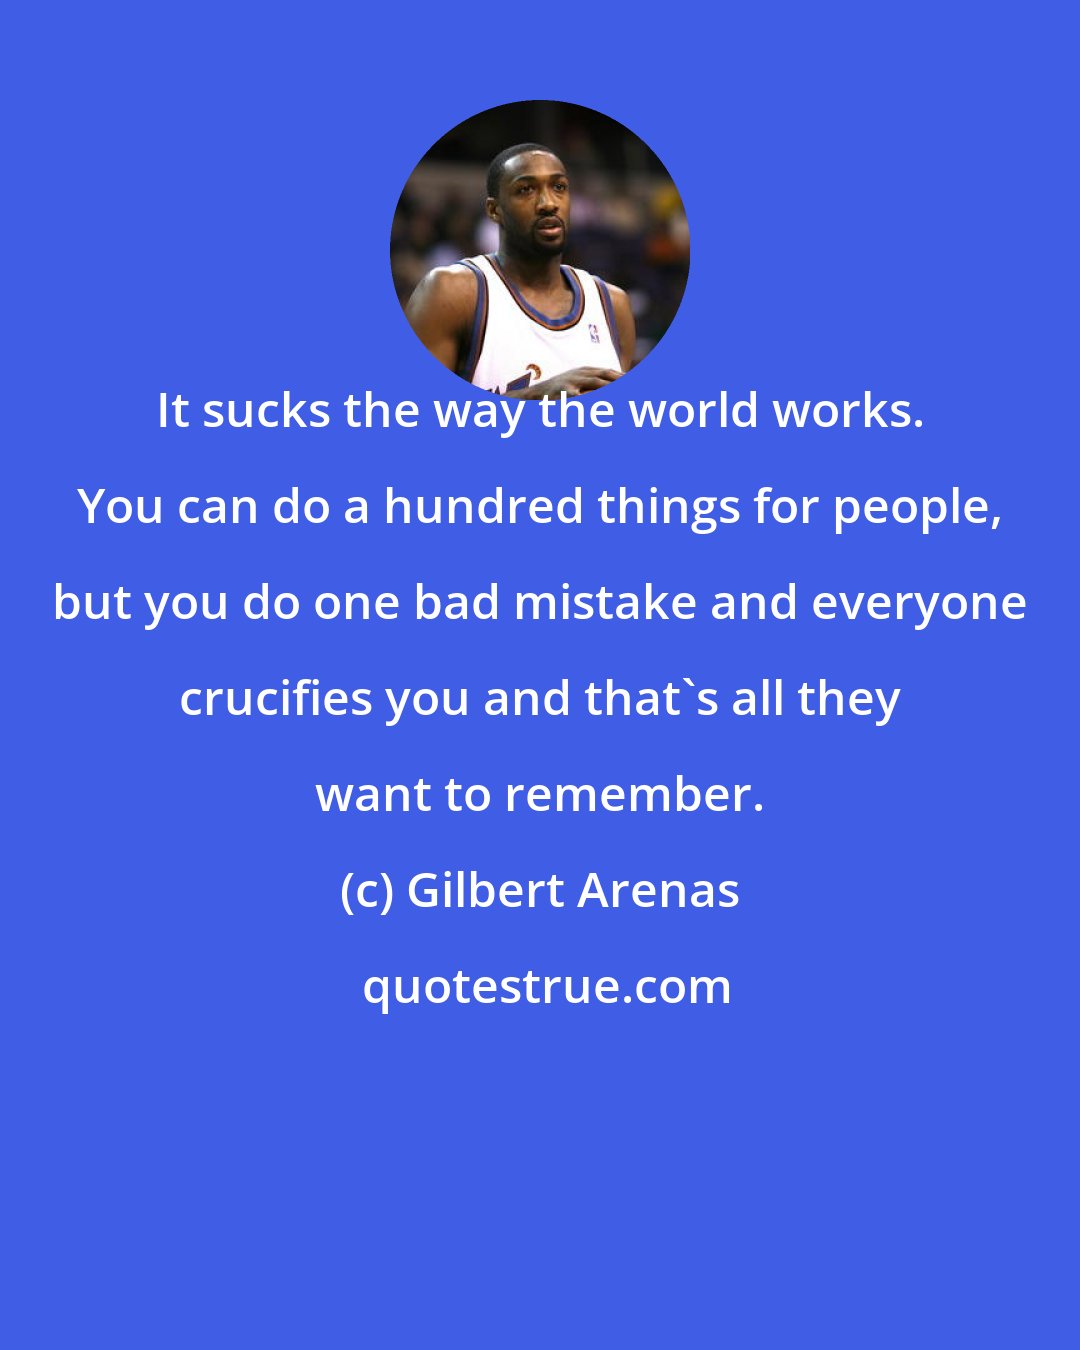 Gilbert Arenas: It sucks the way the world works. You can do a hundred things for people, but you do one bad mistake and everyone crucifies you and that's all they want to remember.